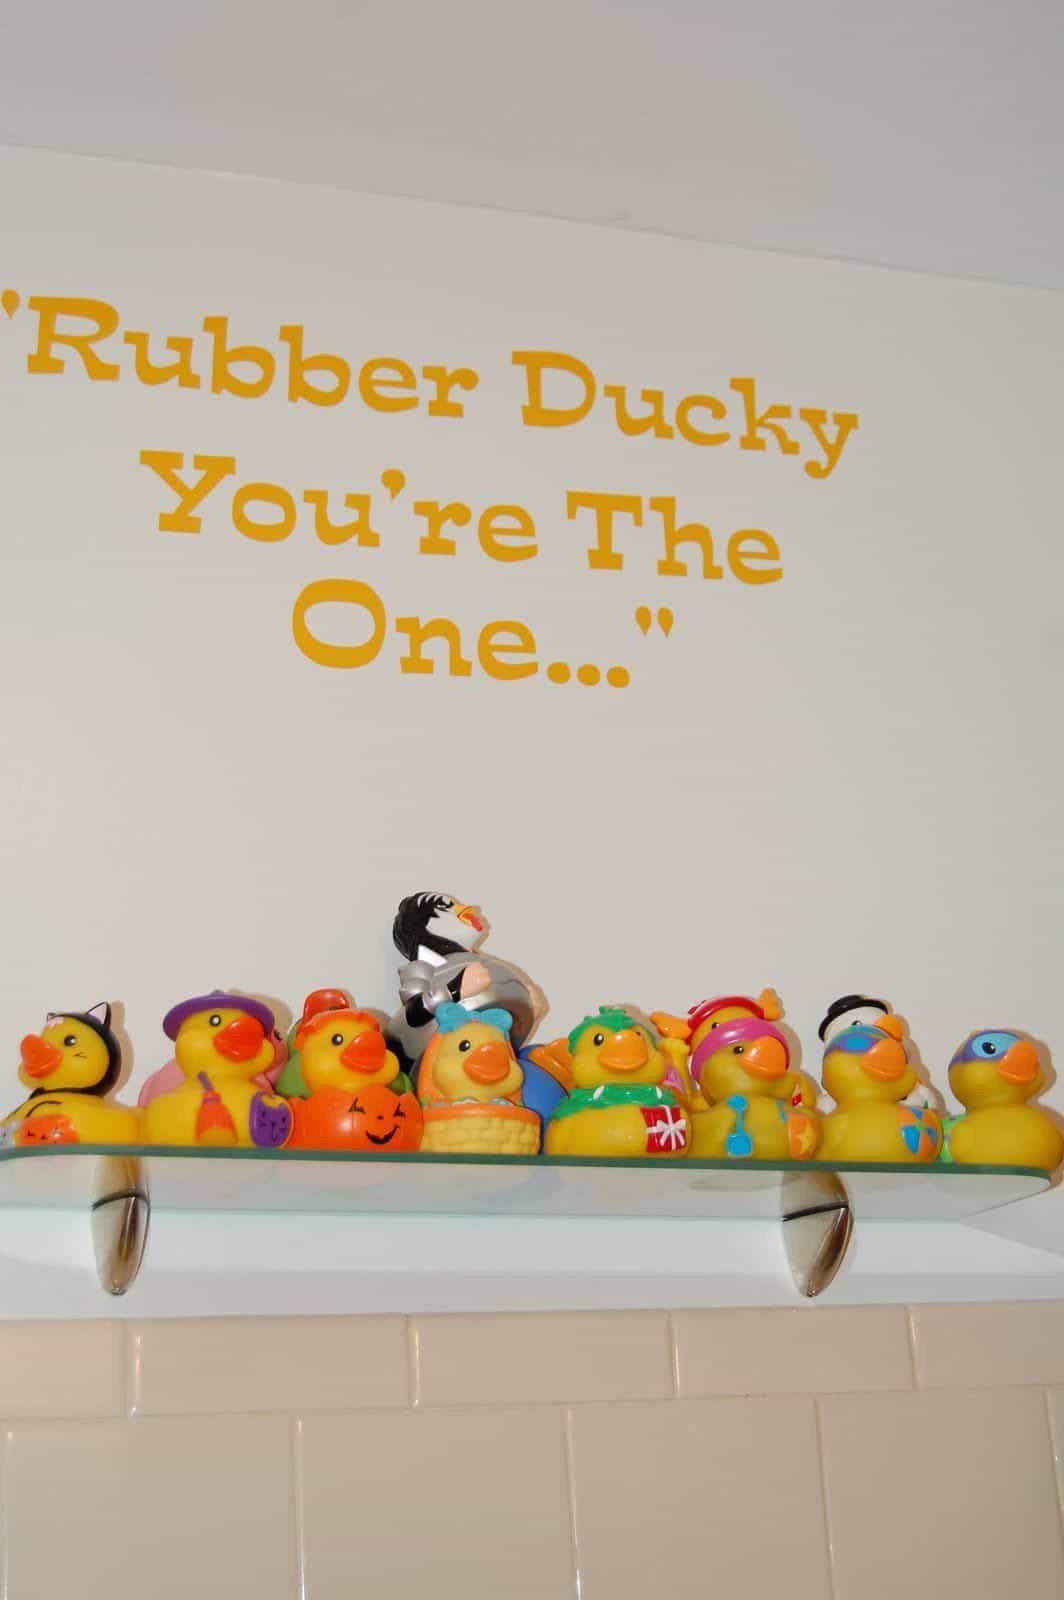 Rubber Ducky Bathroom Decor
 Bathroom With Wall Decals And Rubber Duckies Fun And